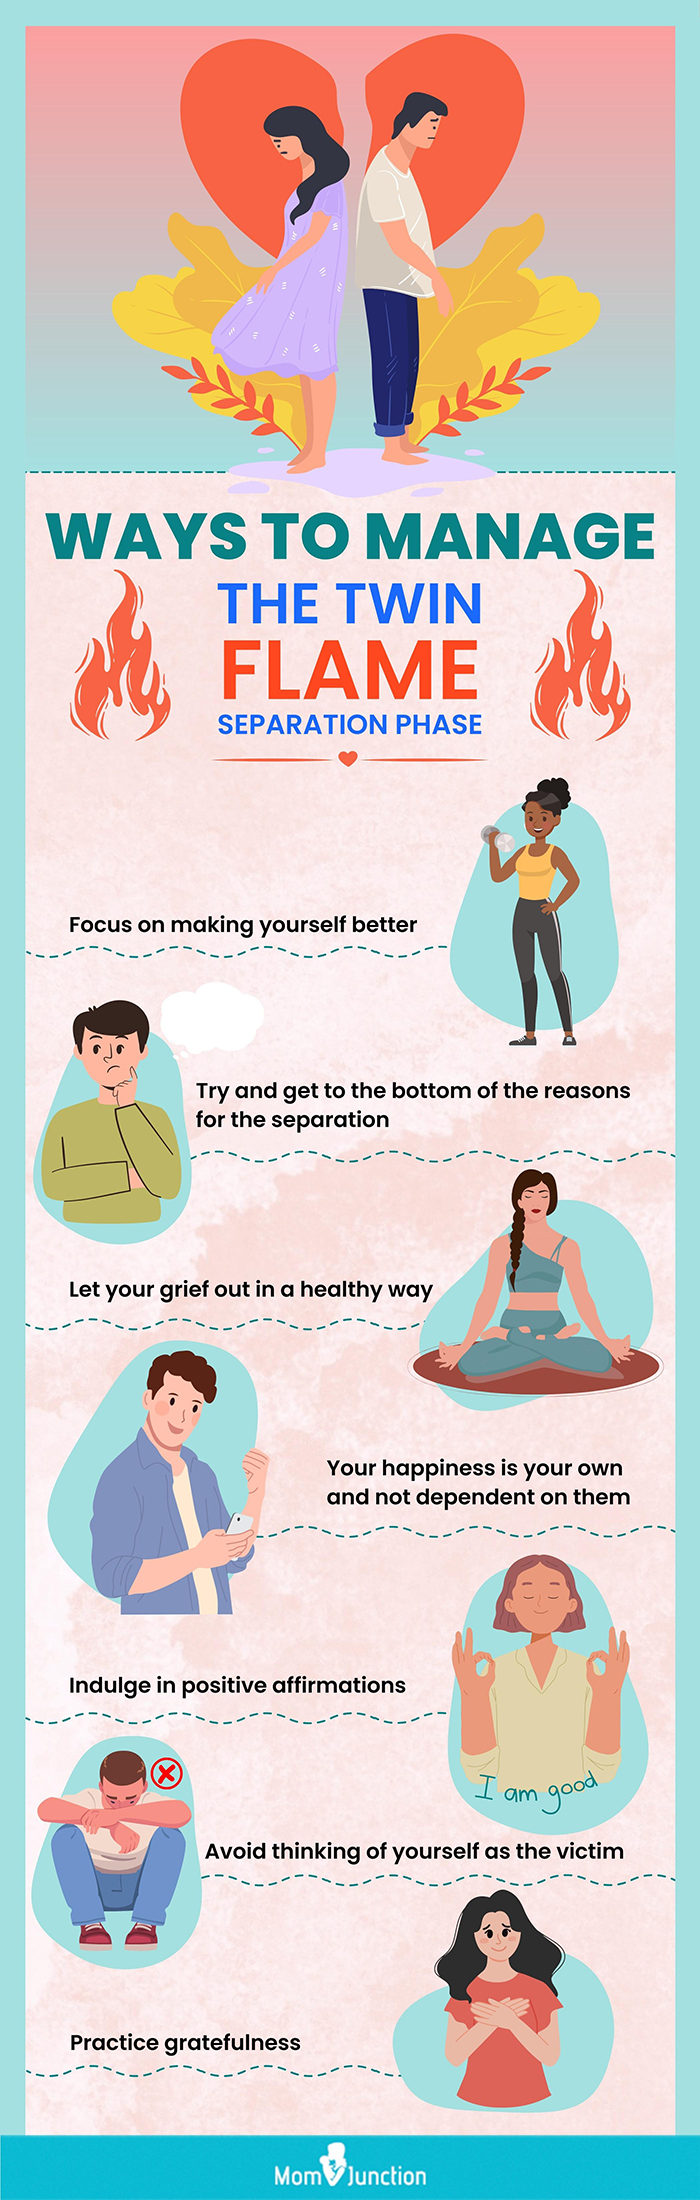 Infographic Dealing With Twin Flame Separation 